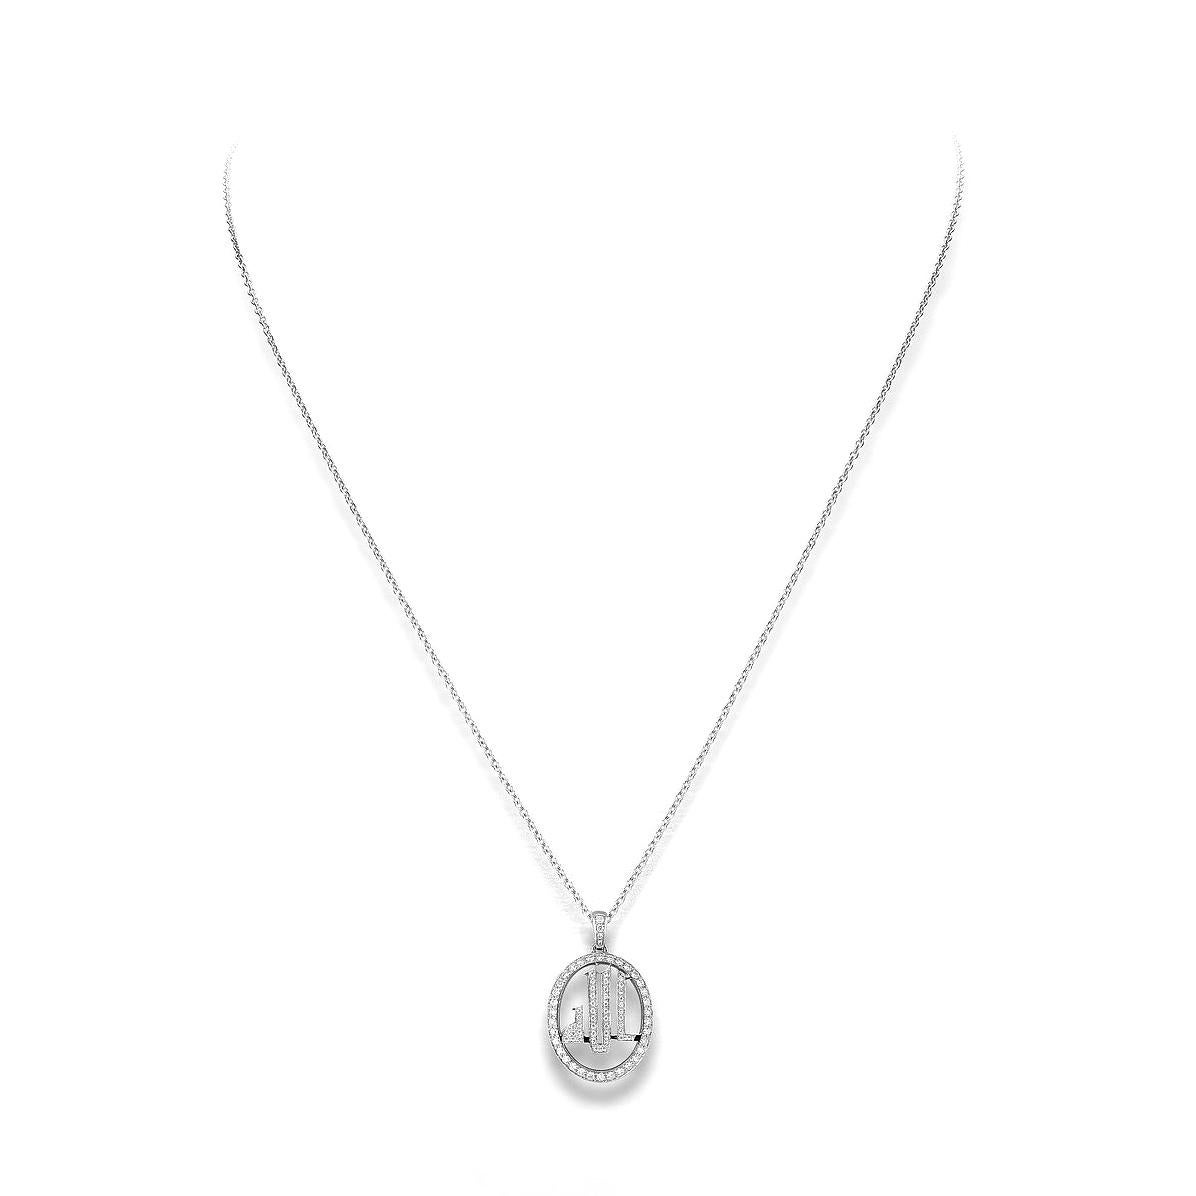 Allah pendant in 18kt white gold set with 81 diamonds 0.53 cts